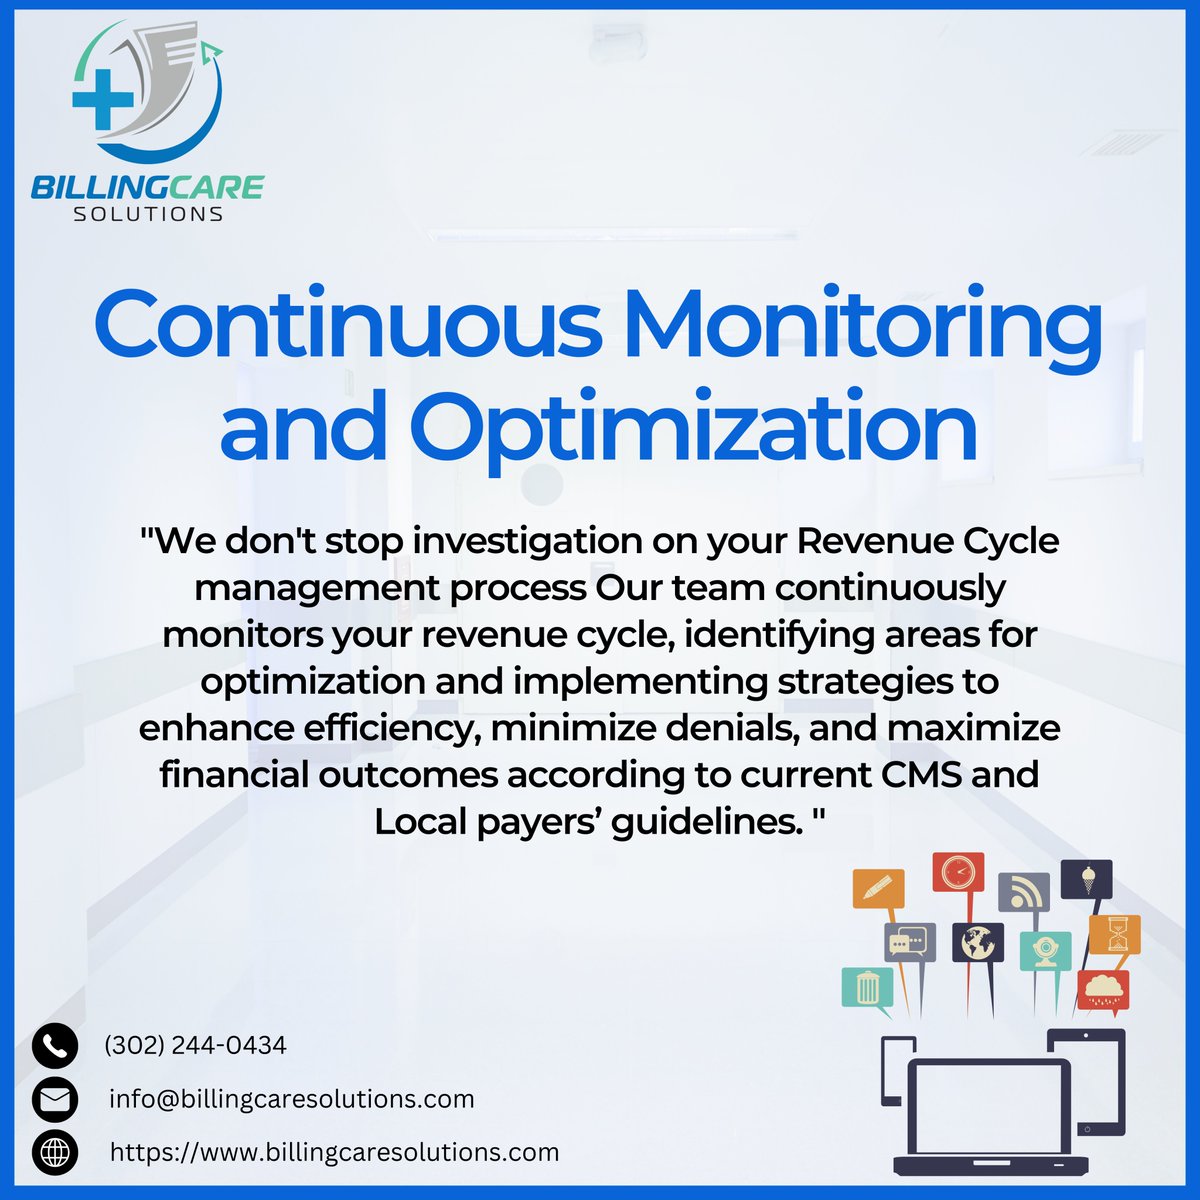 RCM Step # 8 Continuous Monitoring And Optimization #billingcaresolutions #bcs #homecare #credentialing #medicalbilling #healthcaremanagement #health #coronavirus #covid #doctor #medicine #nurse #therapy #hospital #medical #healthcare #doctors #physicaltherapy #Claim #doula